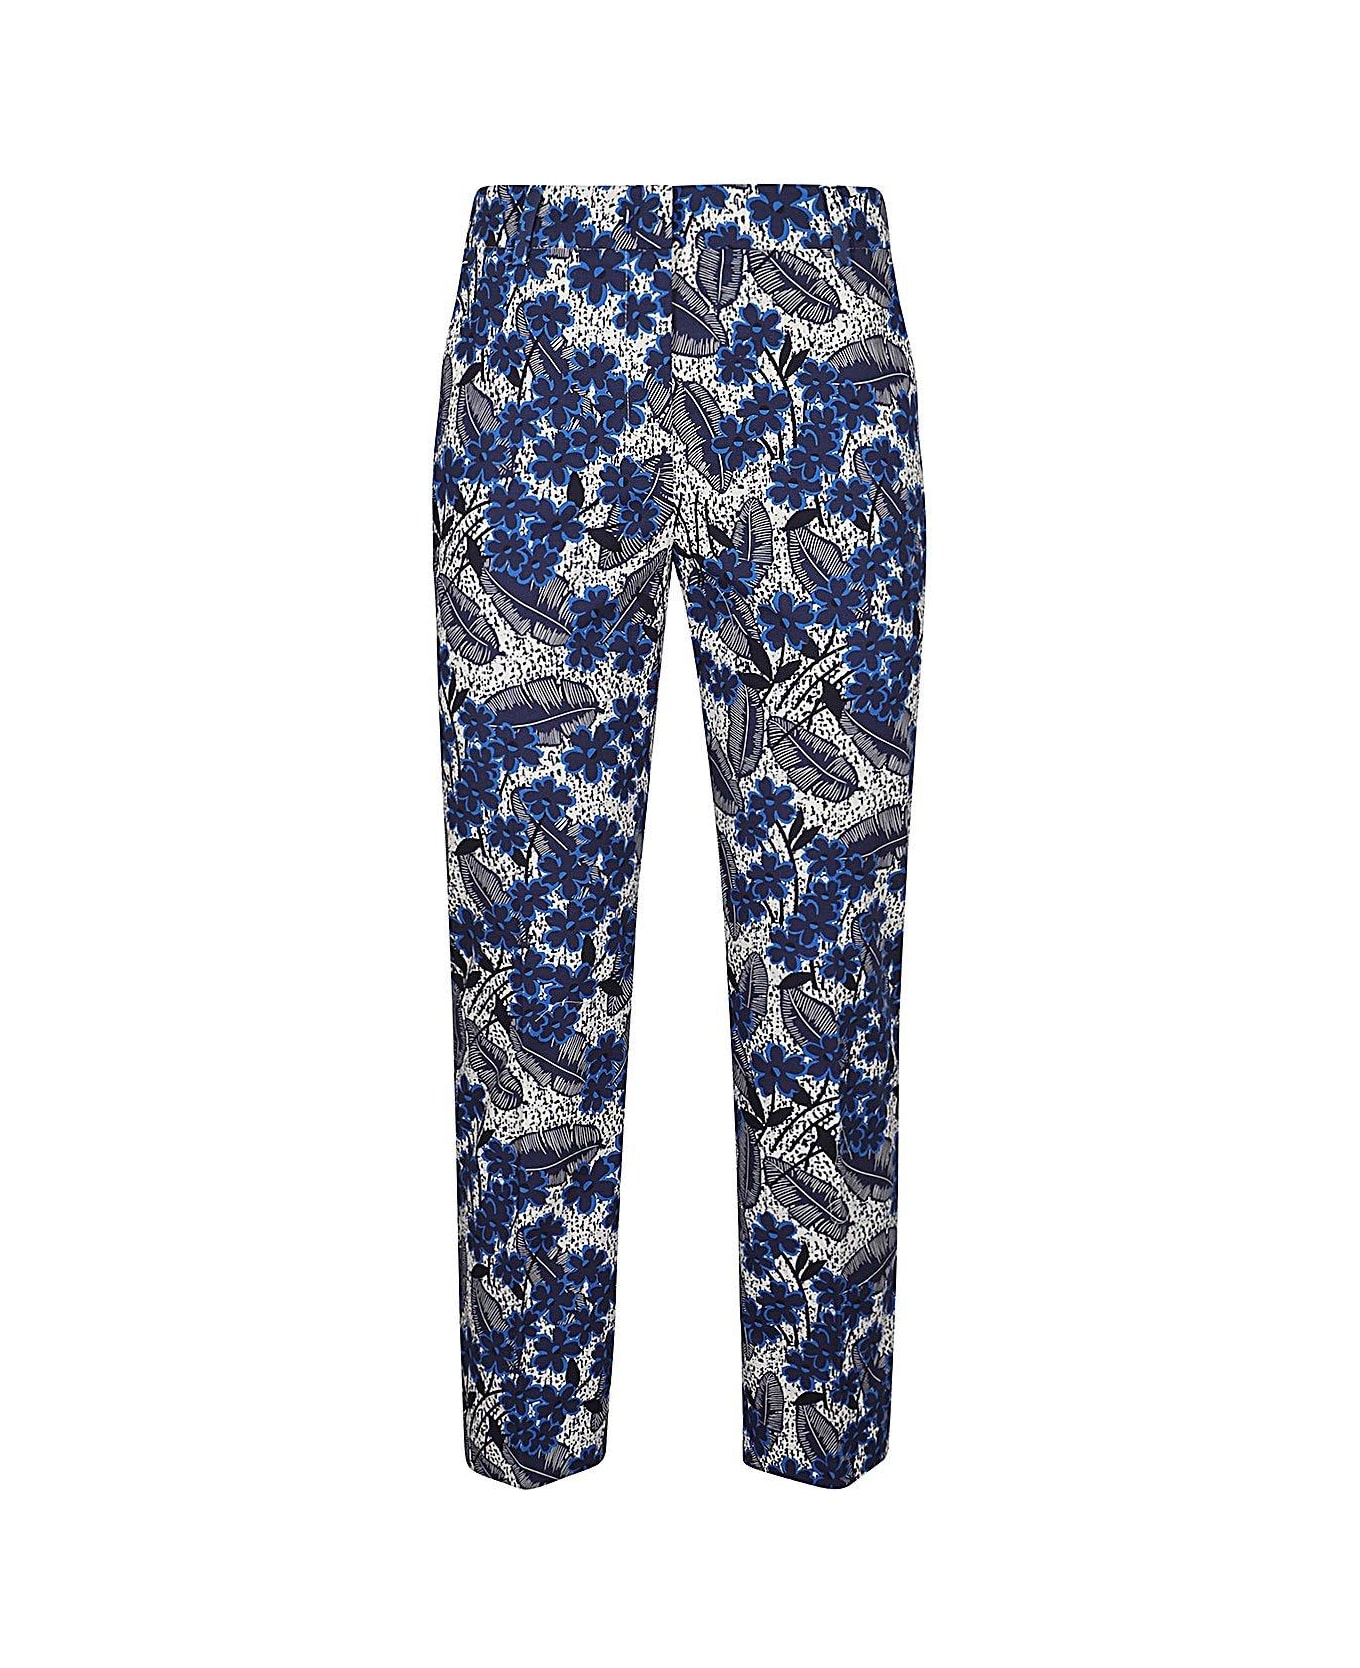 Weekend Max Mara Floral Printed Cropped Trousers - Bluette